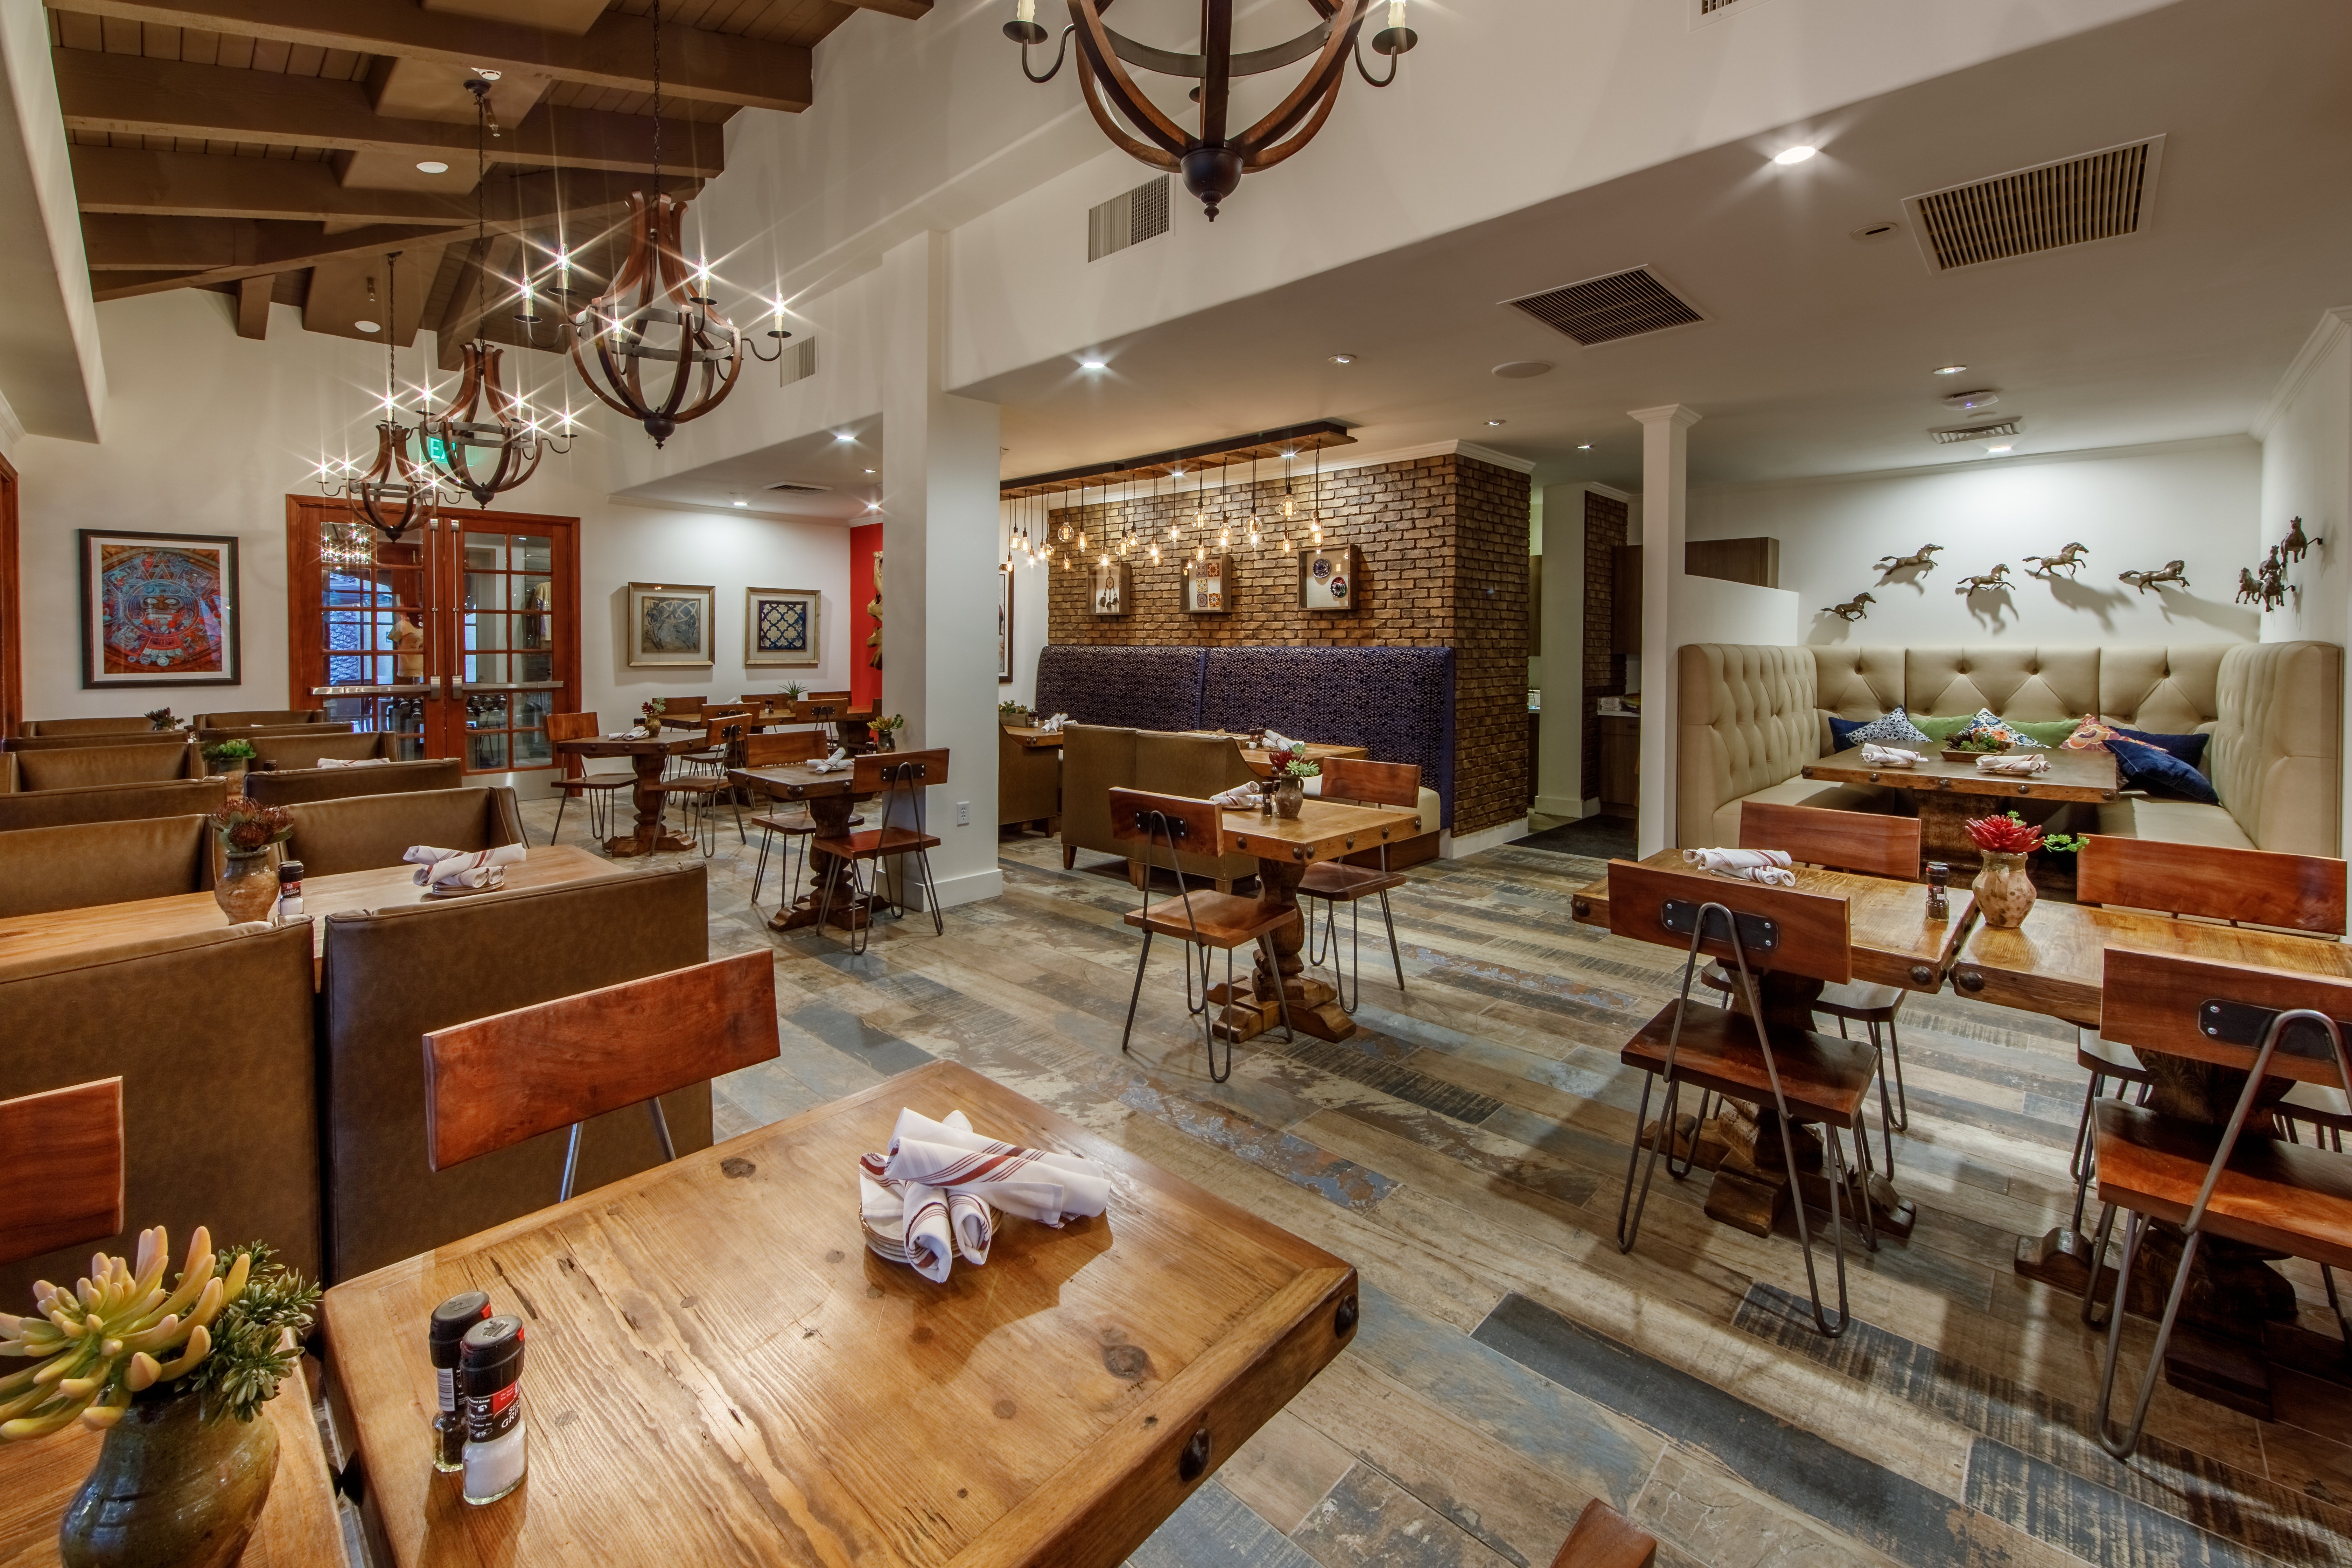 Dine at the ArteZania Kitchen and Cantina located on-site